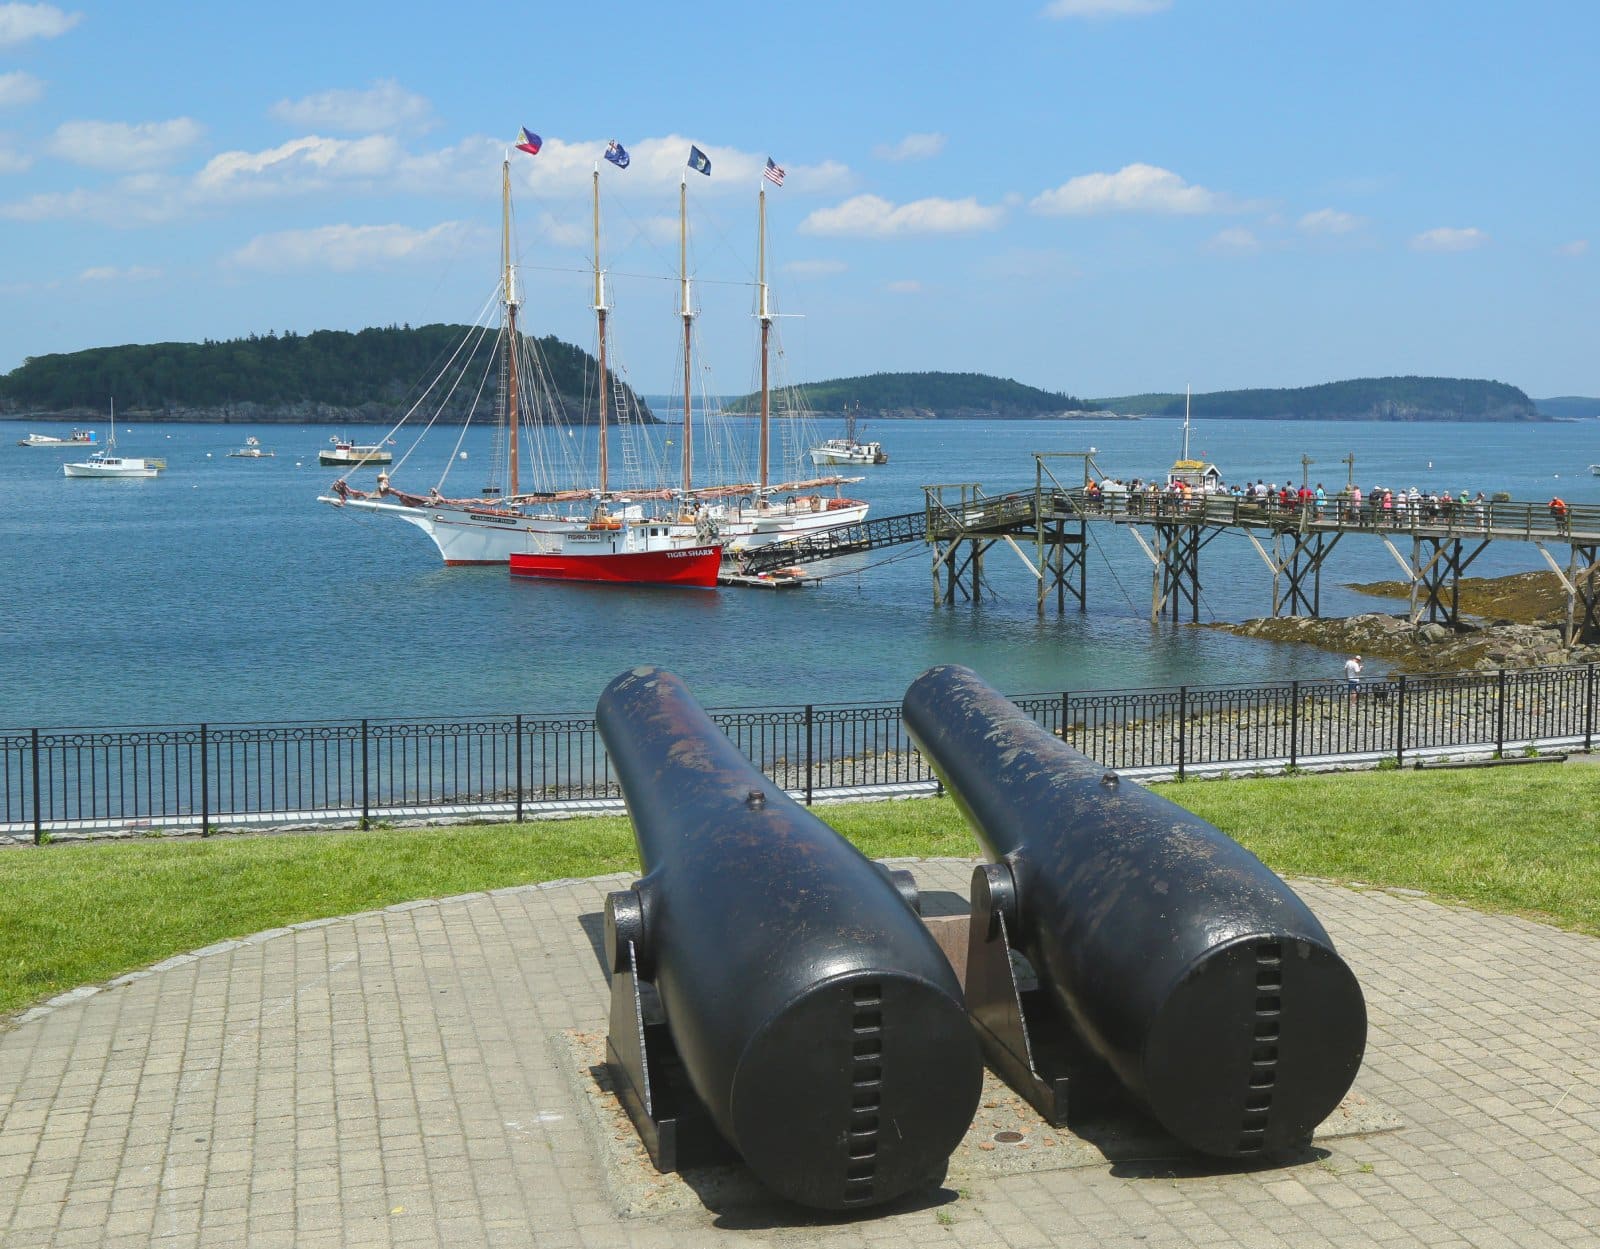 <p class="wp-caption-text">Image Credit: Shutterstock / Leonard Zhukovsky</p>  <p>Immerse yourself in the charm of Bar Harbor, a gateway to Acadia and a destination in its own right. It offers everything from high-end resorts to quaint inns, perfect for exploring the local culture and cuisine.</p>